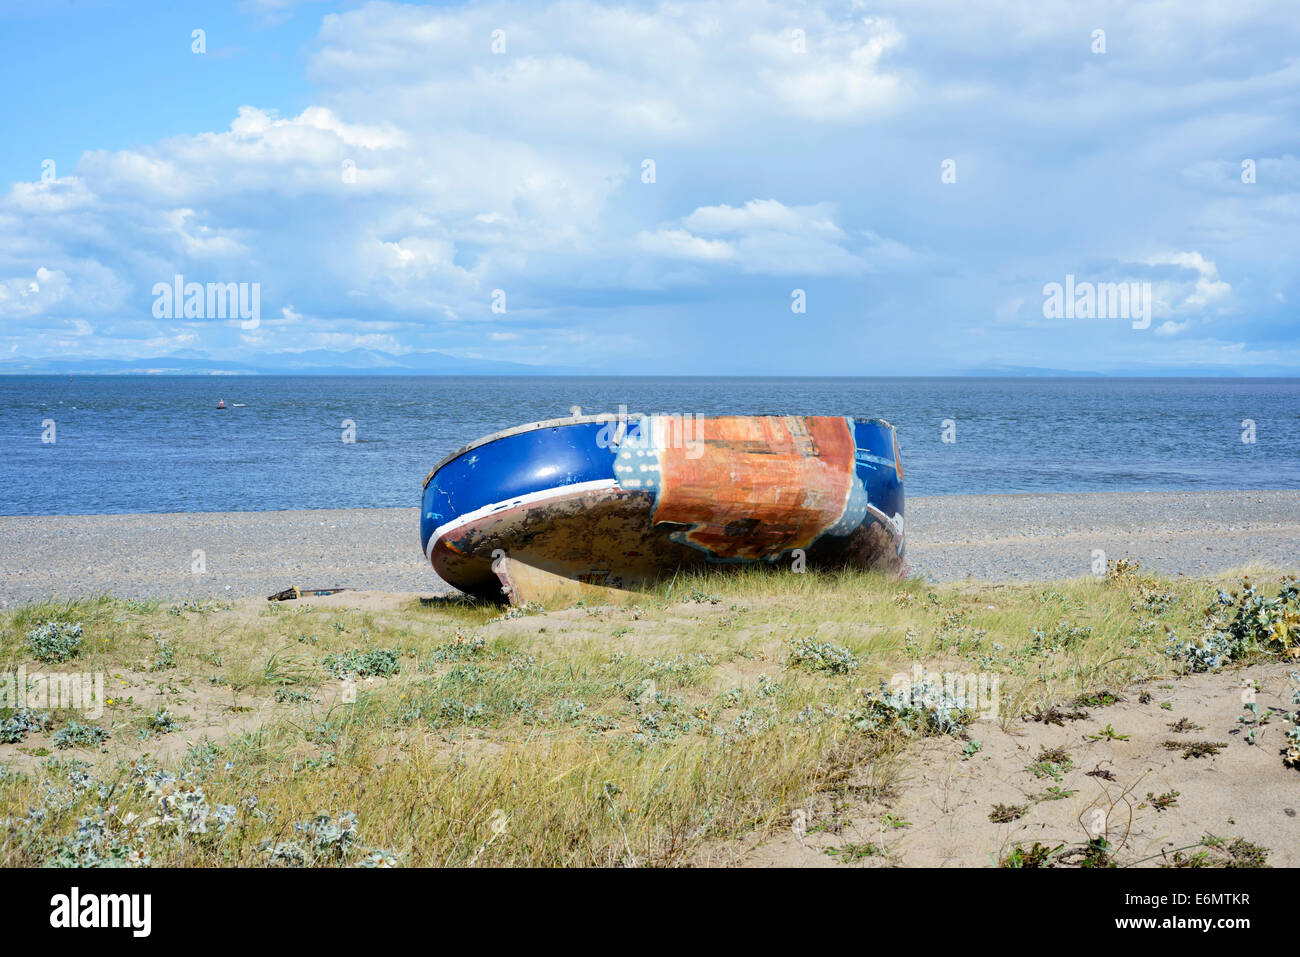 Abandoned boat on a beach Stock Photo